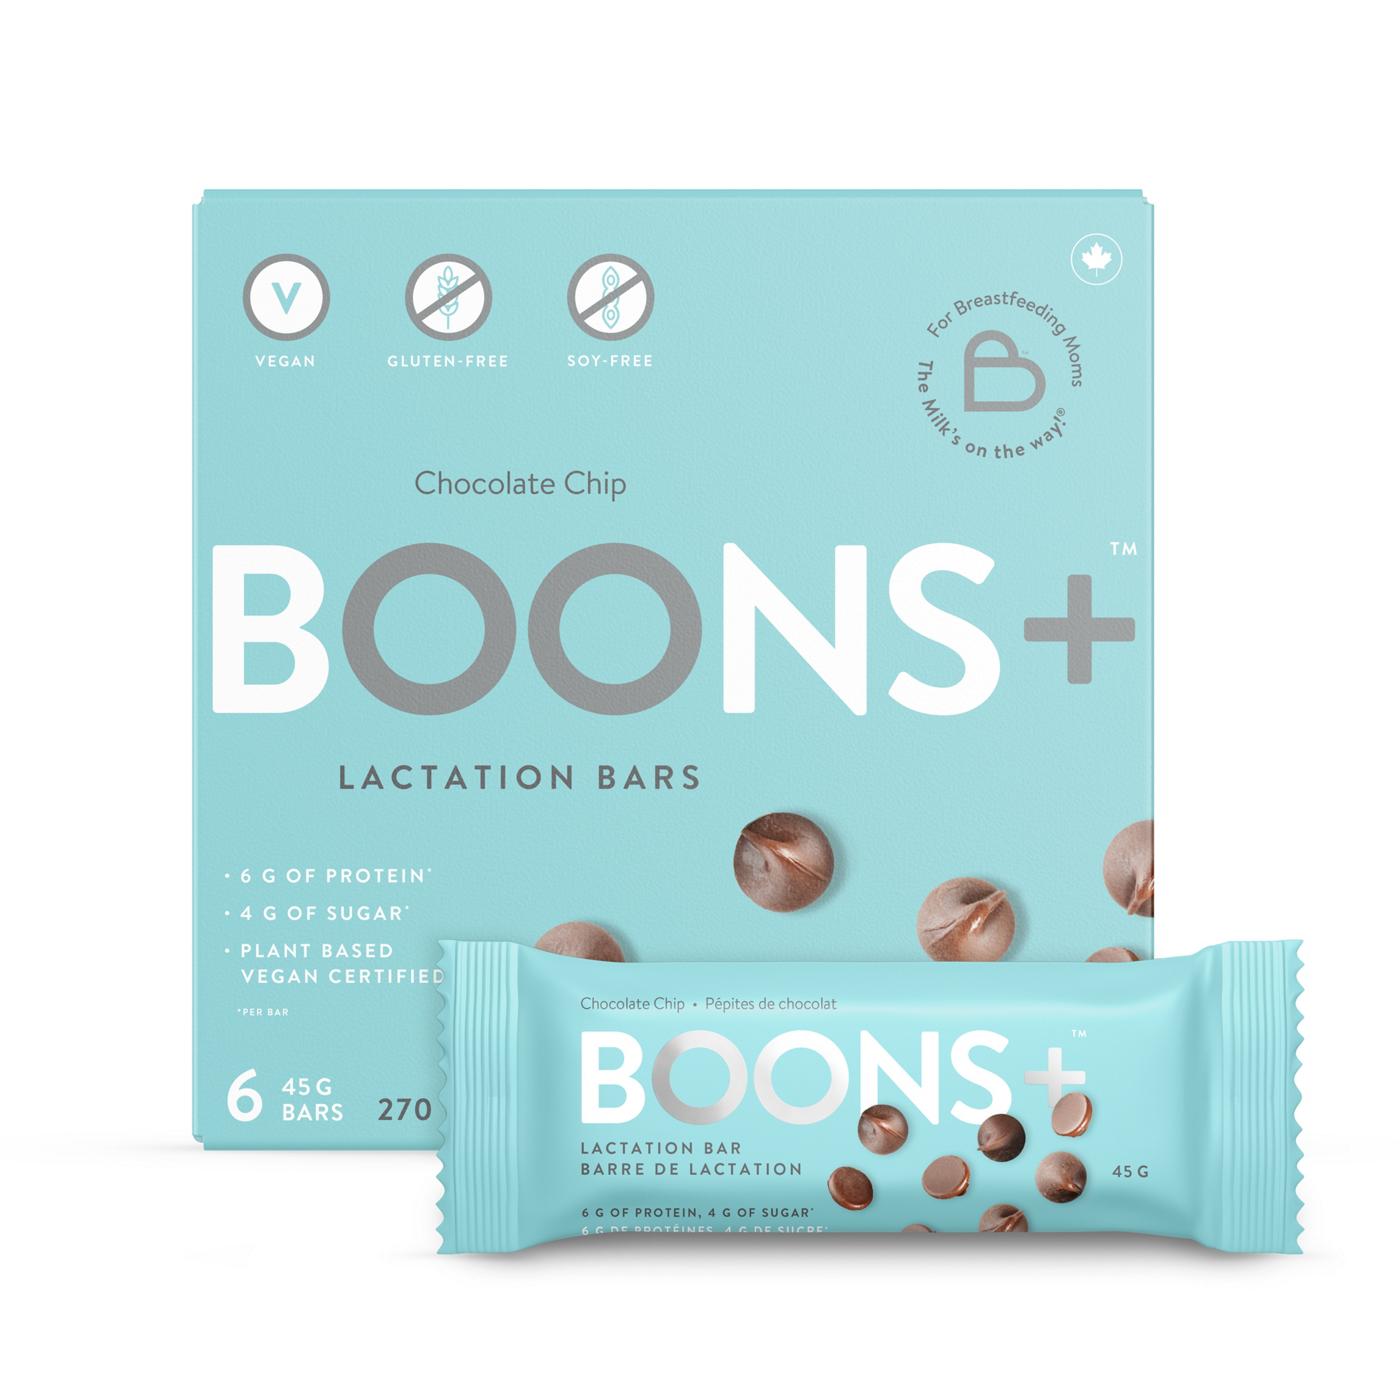 Boons + Lactation Bars Chocolate Chip; image 3 of 3